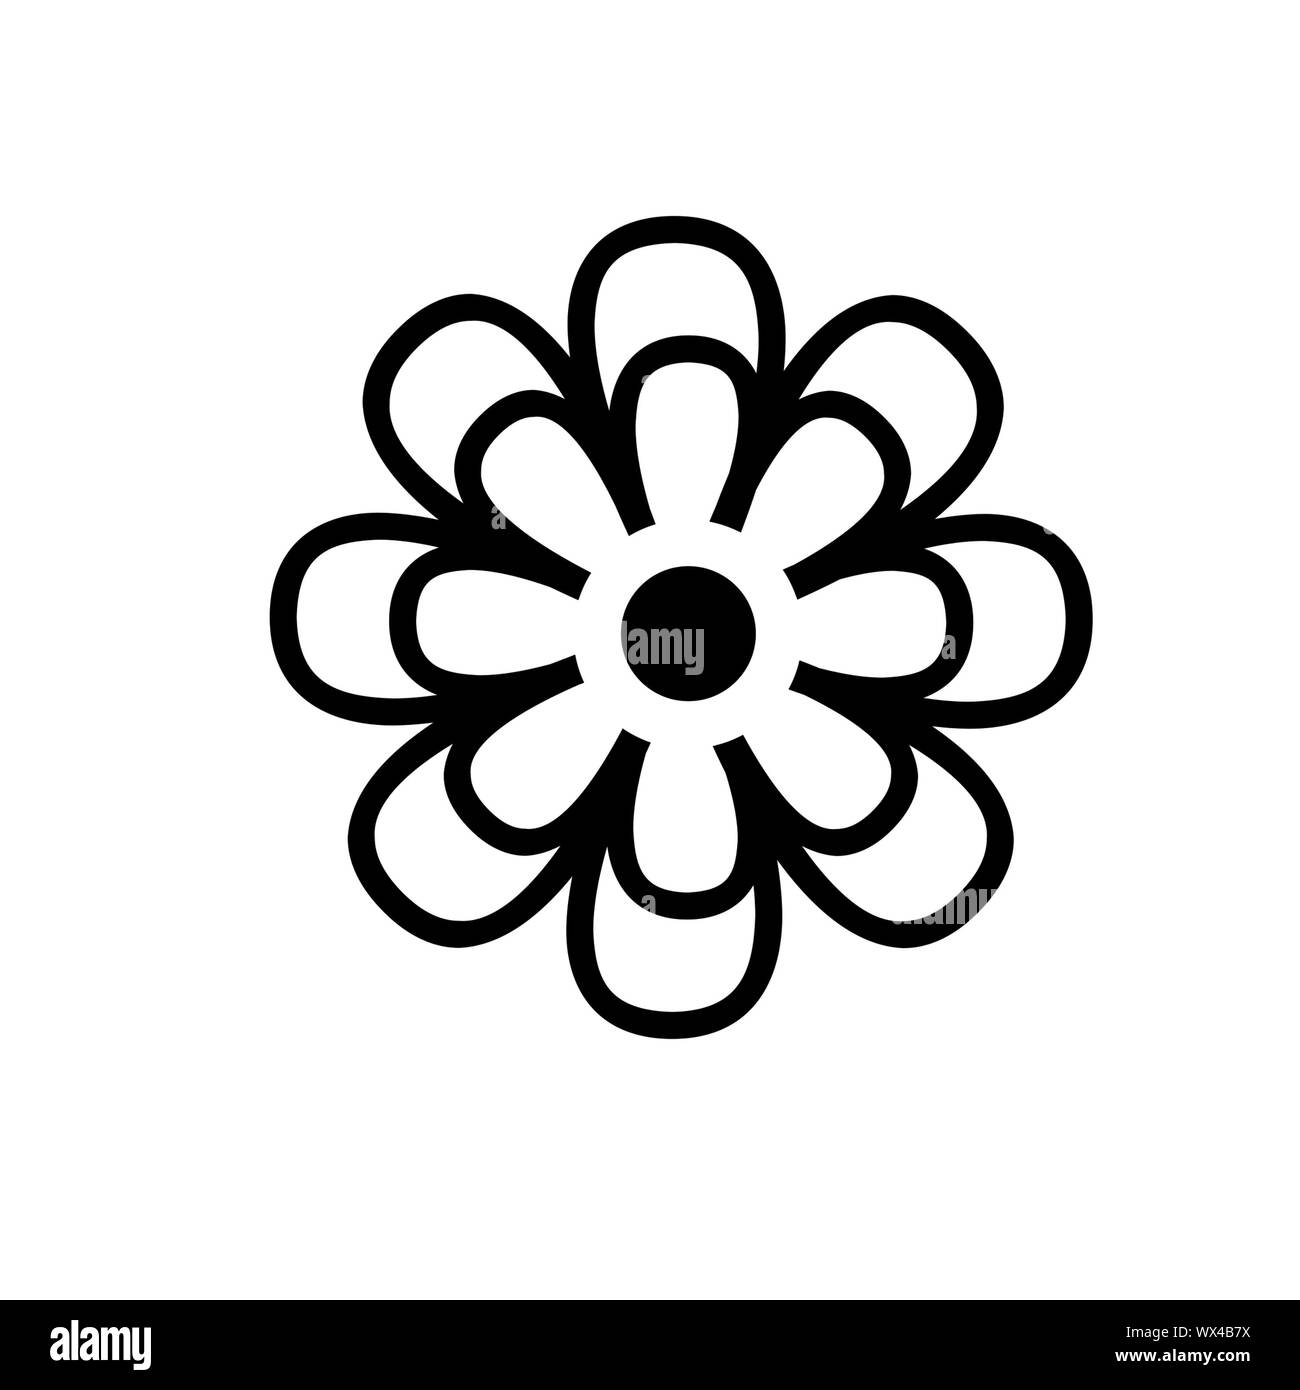 Flower icon simple isolated on white background. Stock Photo